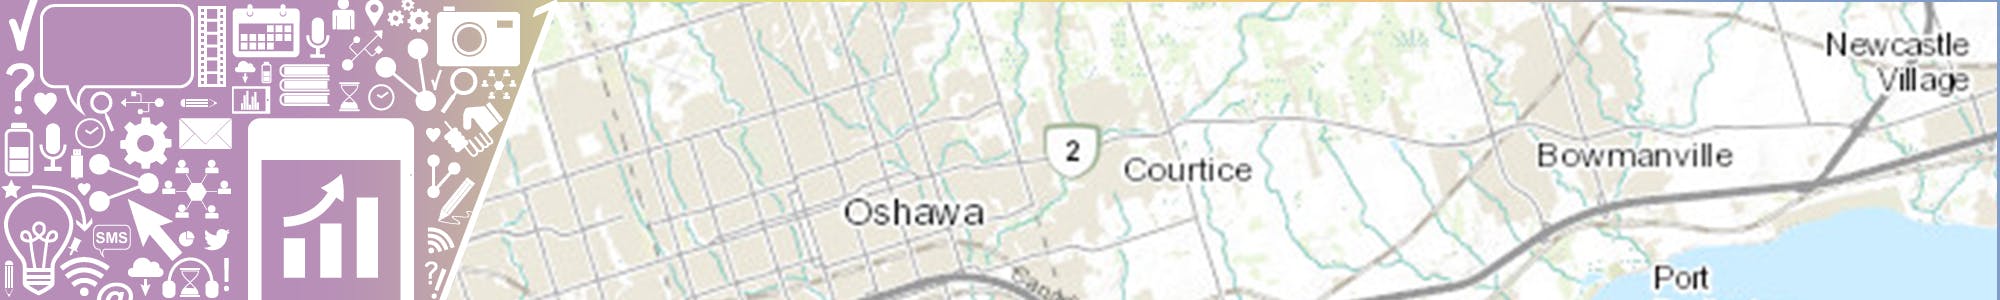 Open Data project banner showing graphic lelments and the map around Oshawa